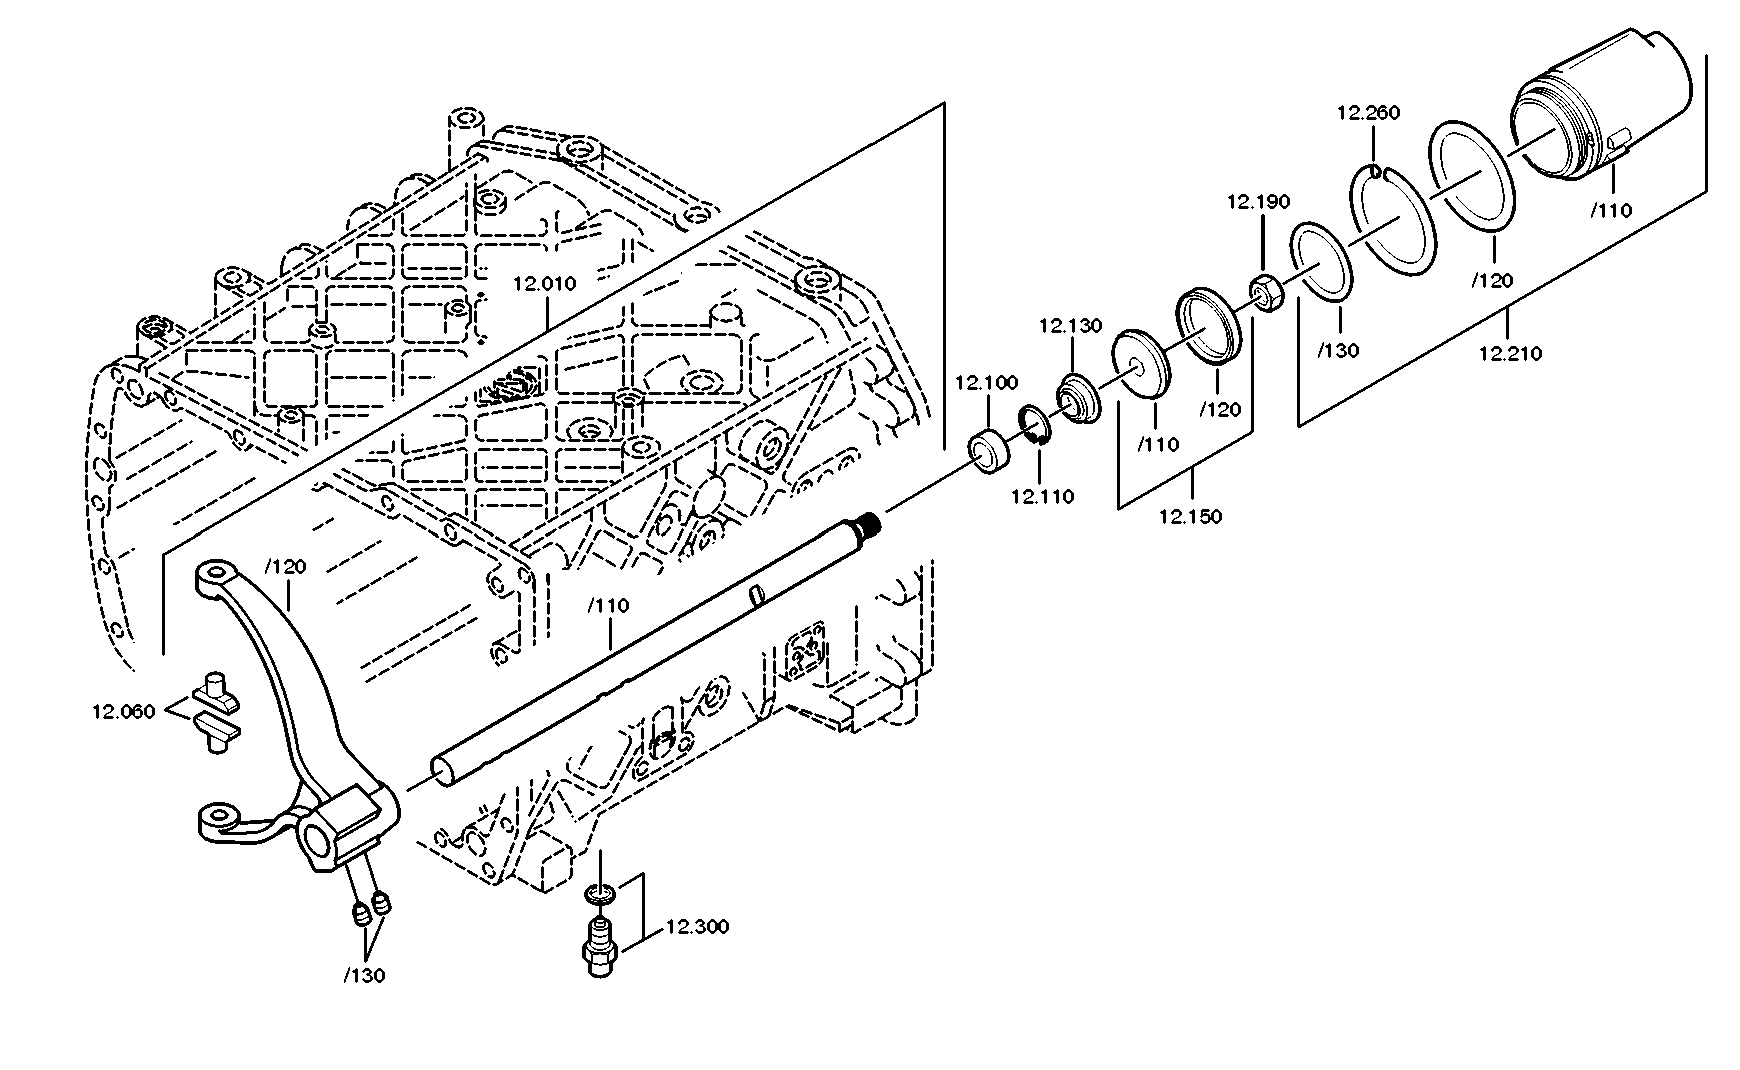 drawing for DAF 1897664 - 5/2 WAY VALVE (figure 4)